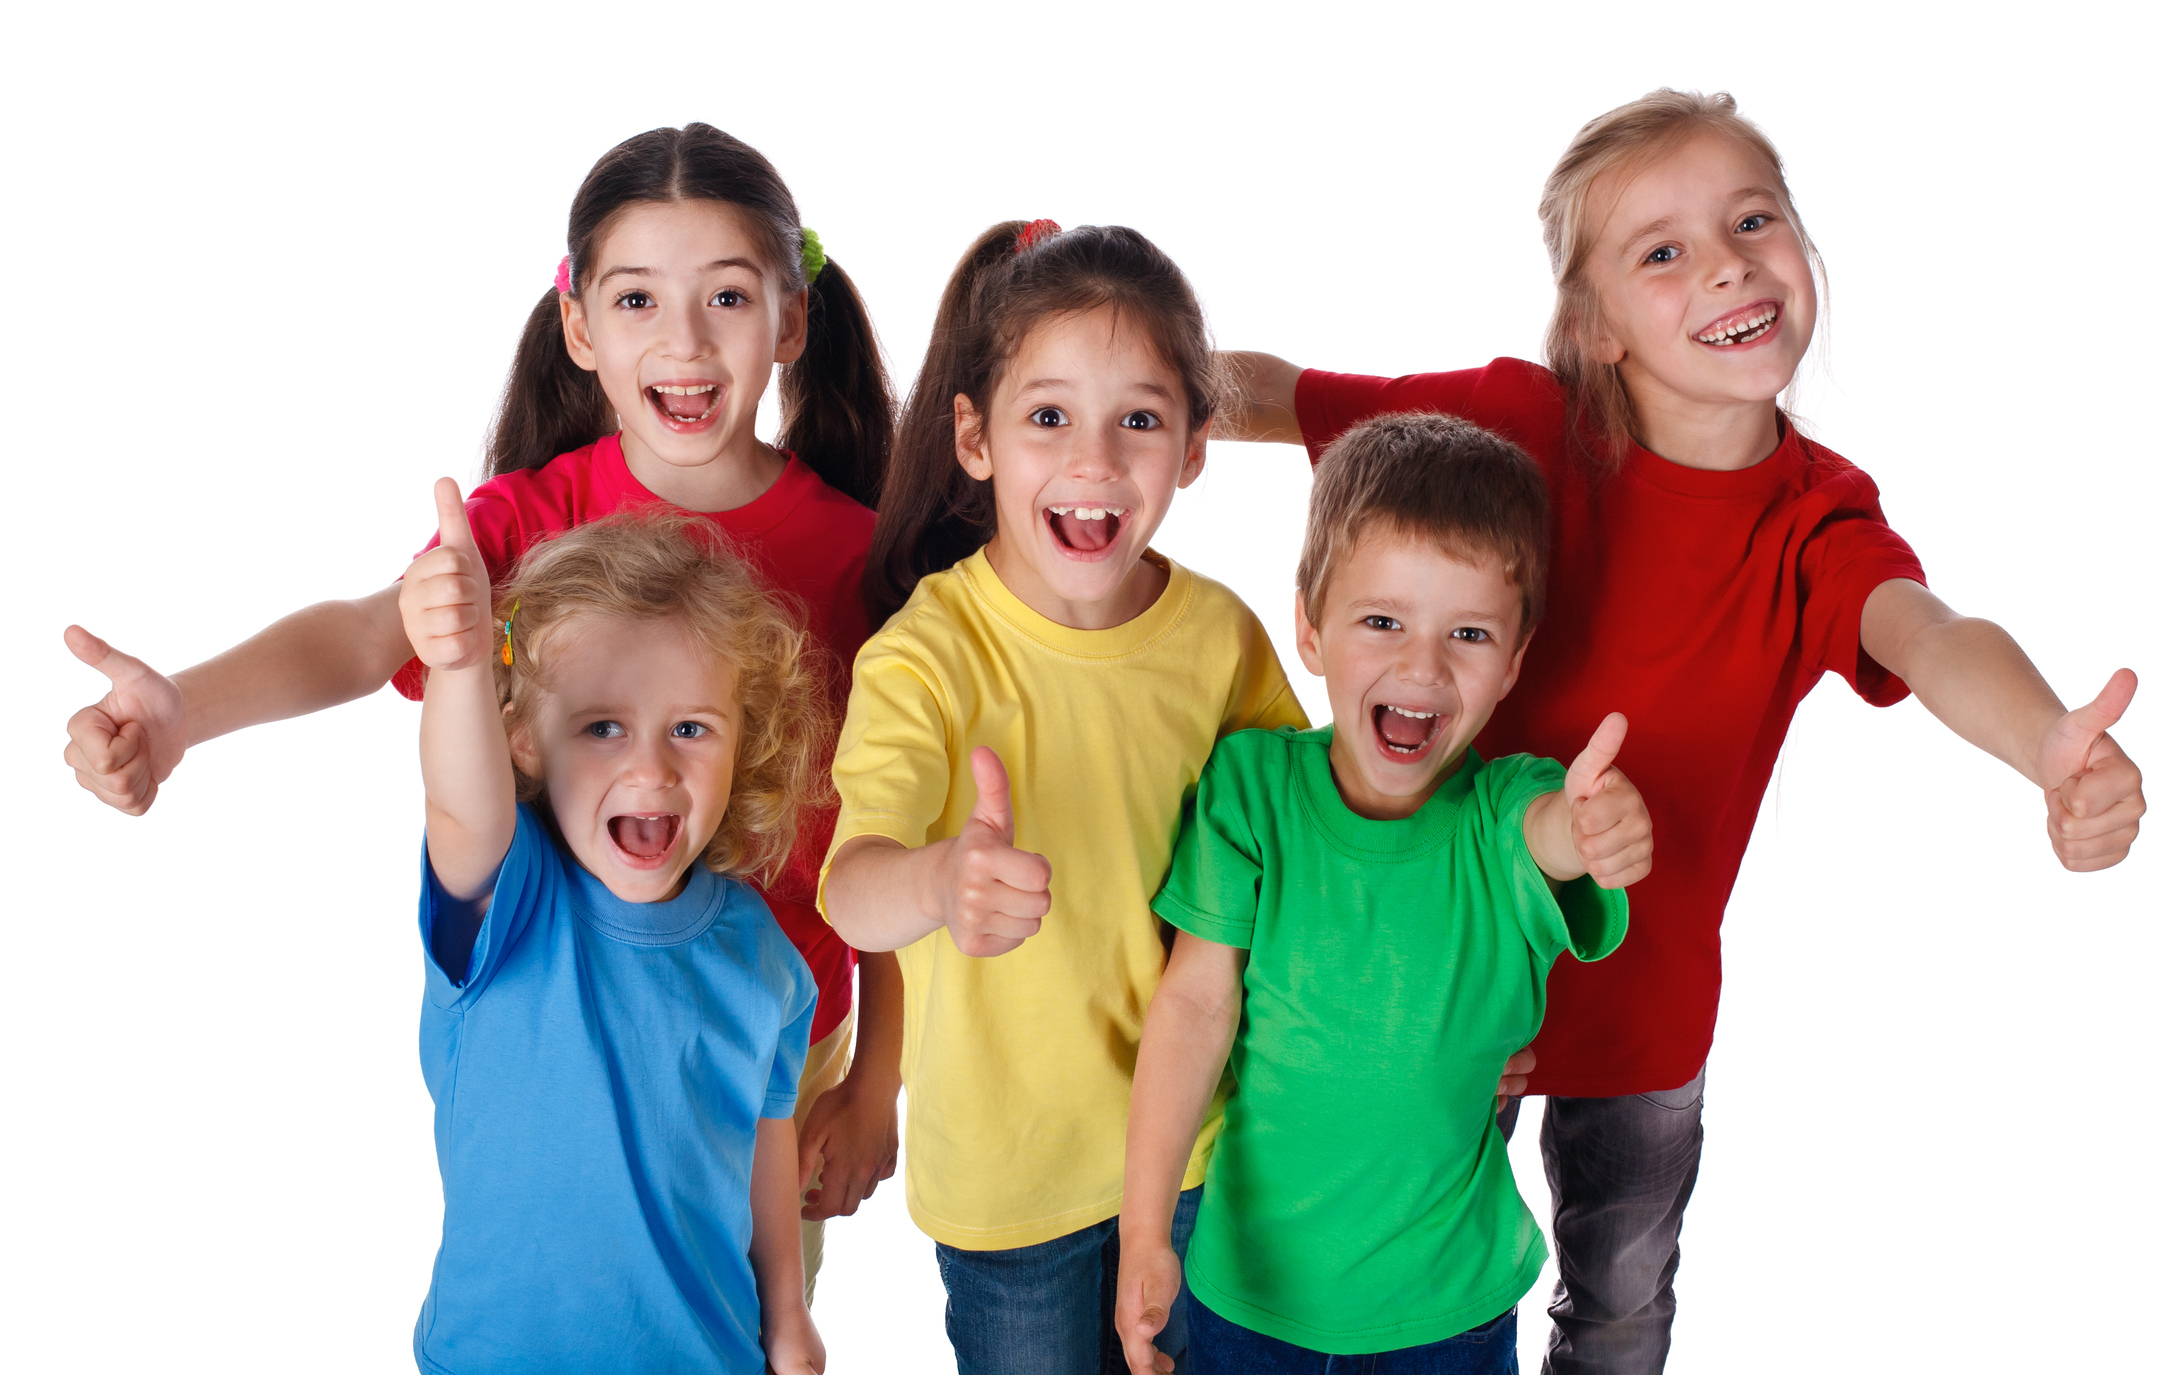 Group of children with thumbs up sign